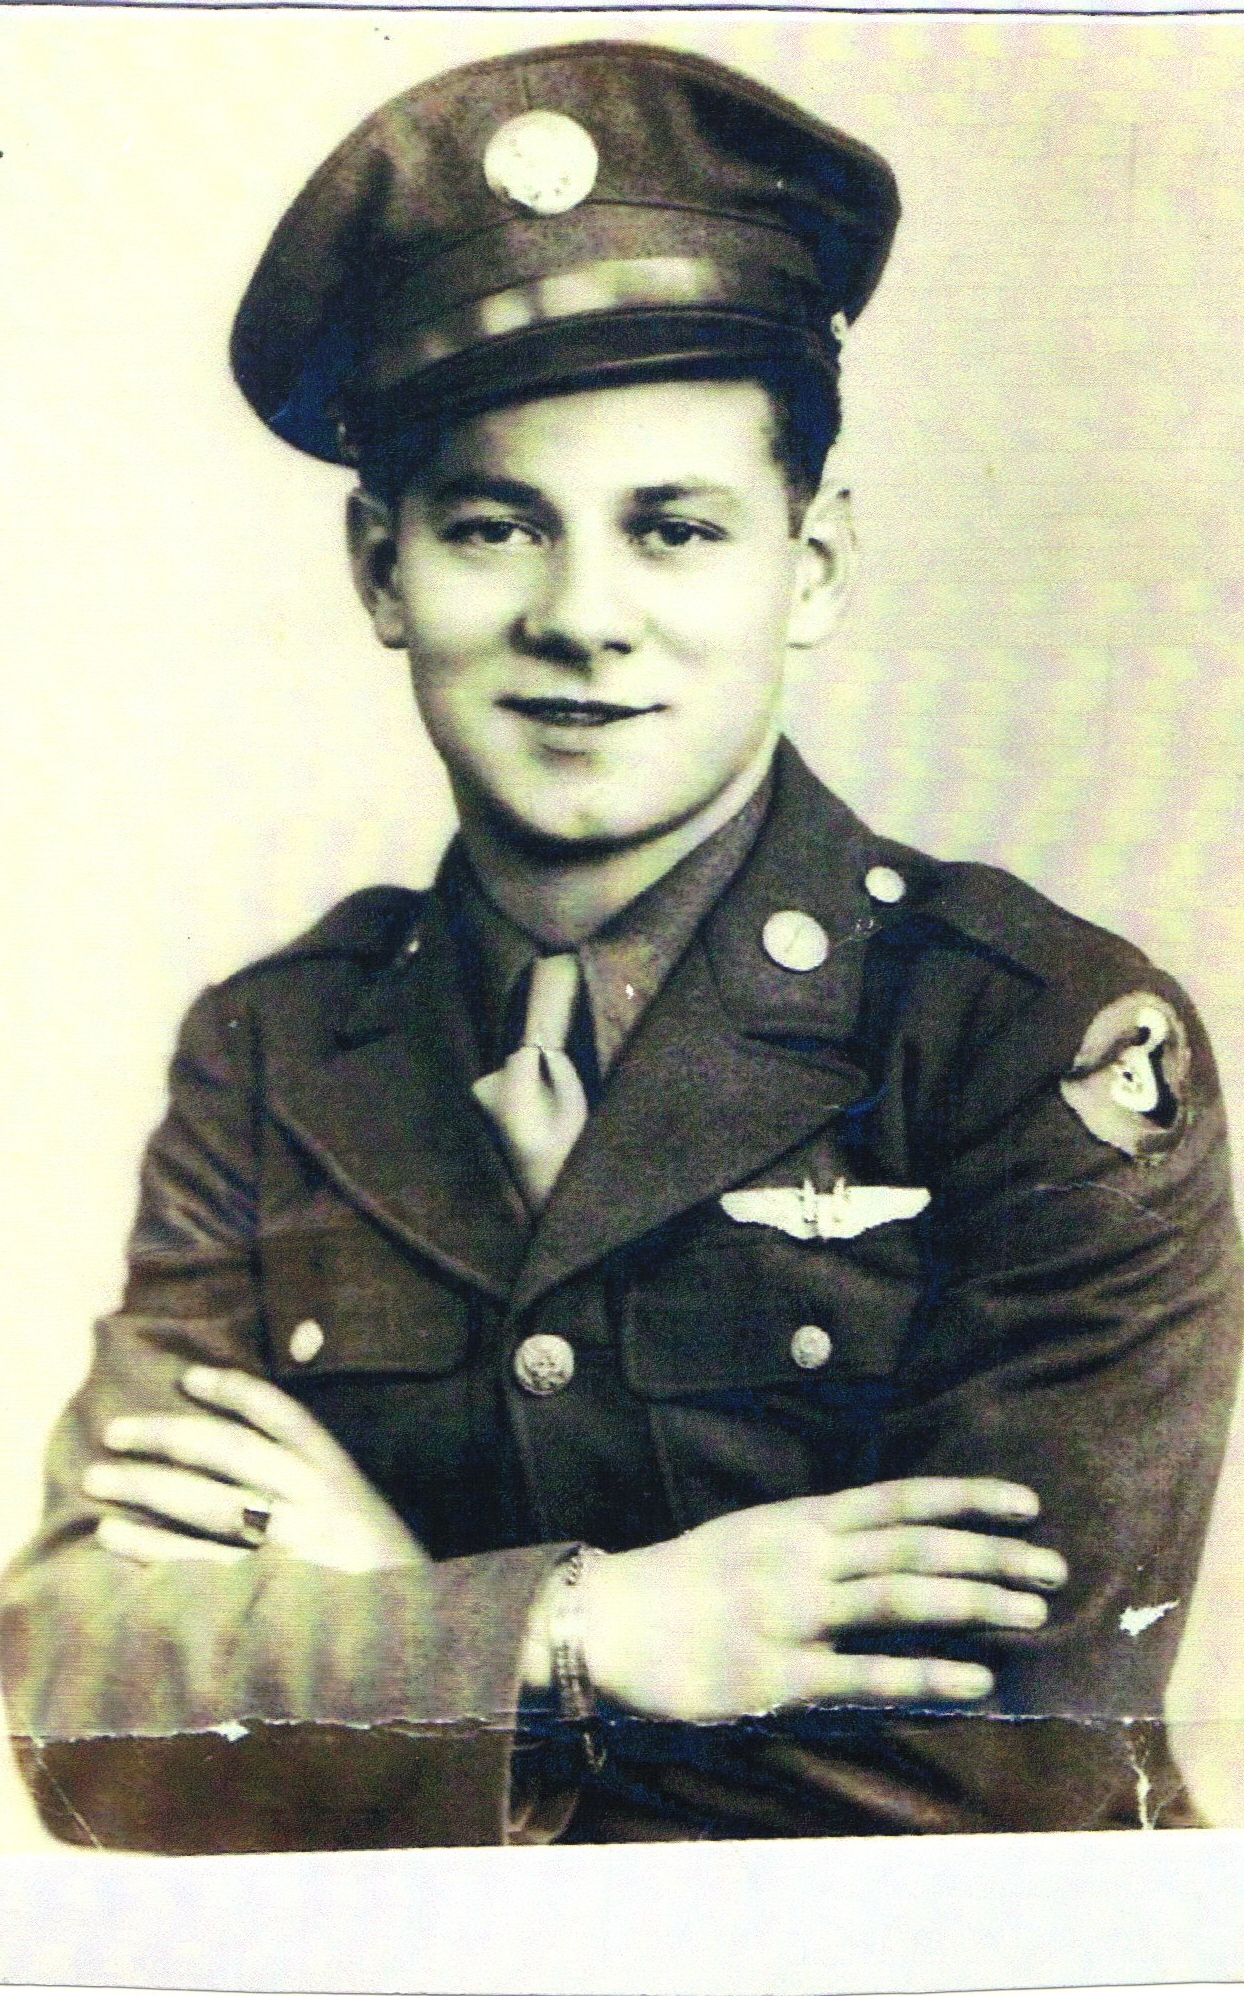 Air Force picture 1944 WWII